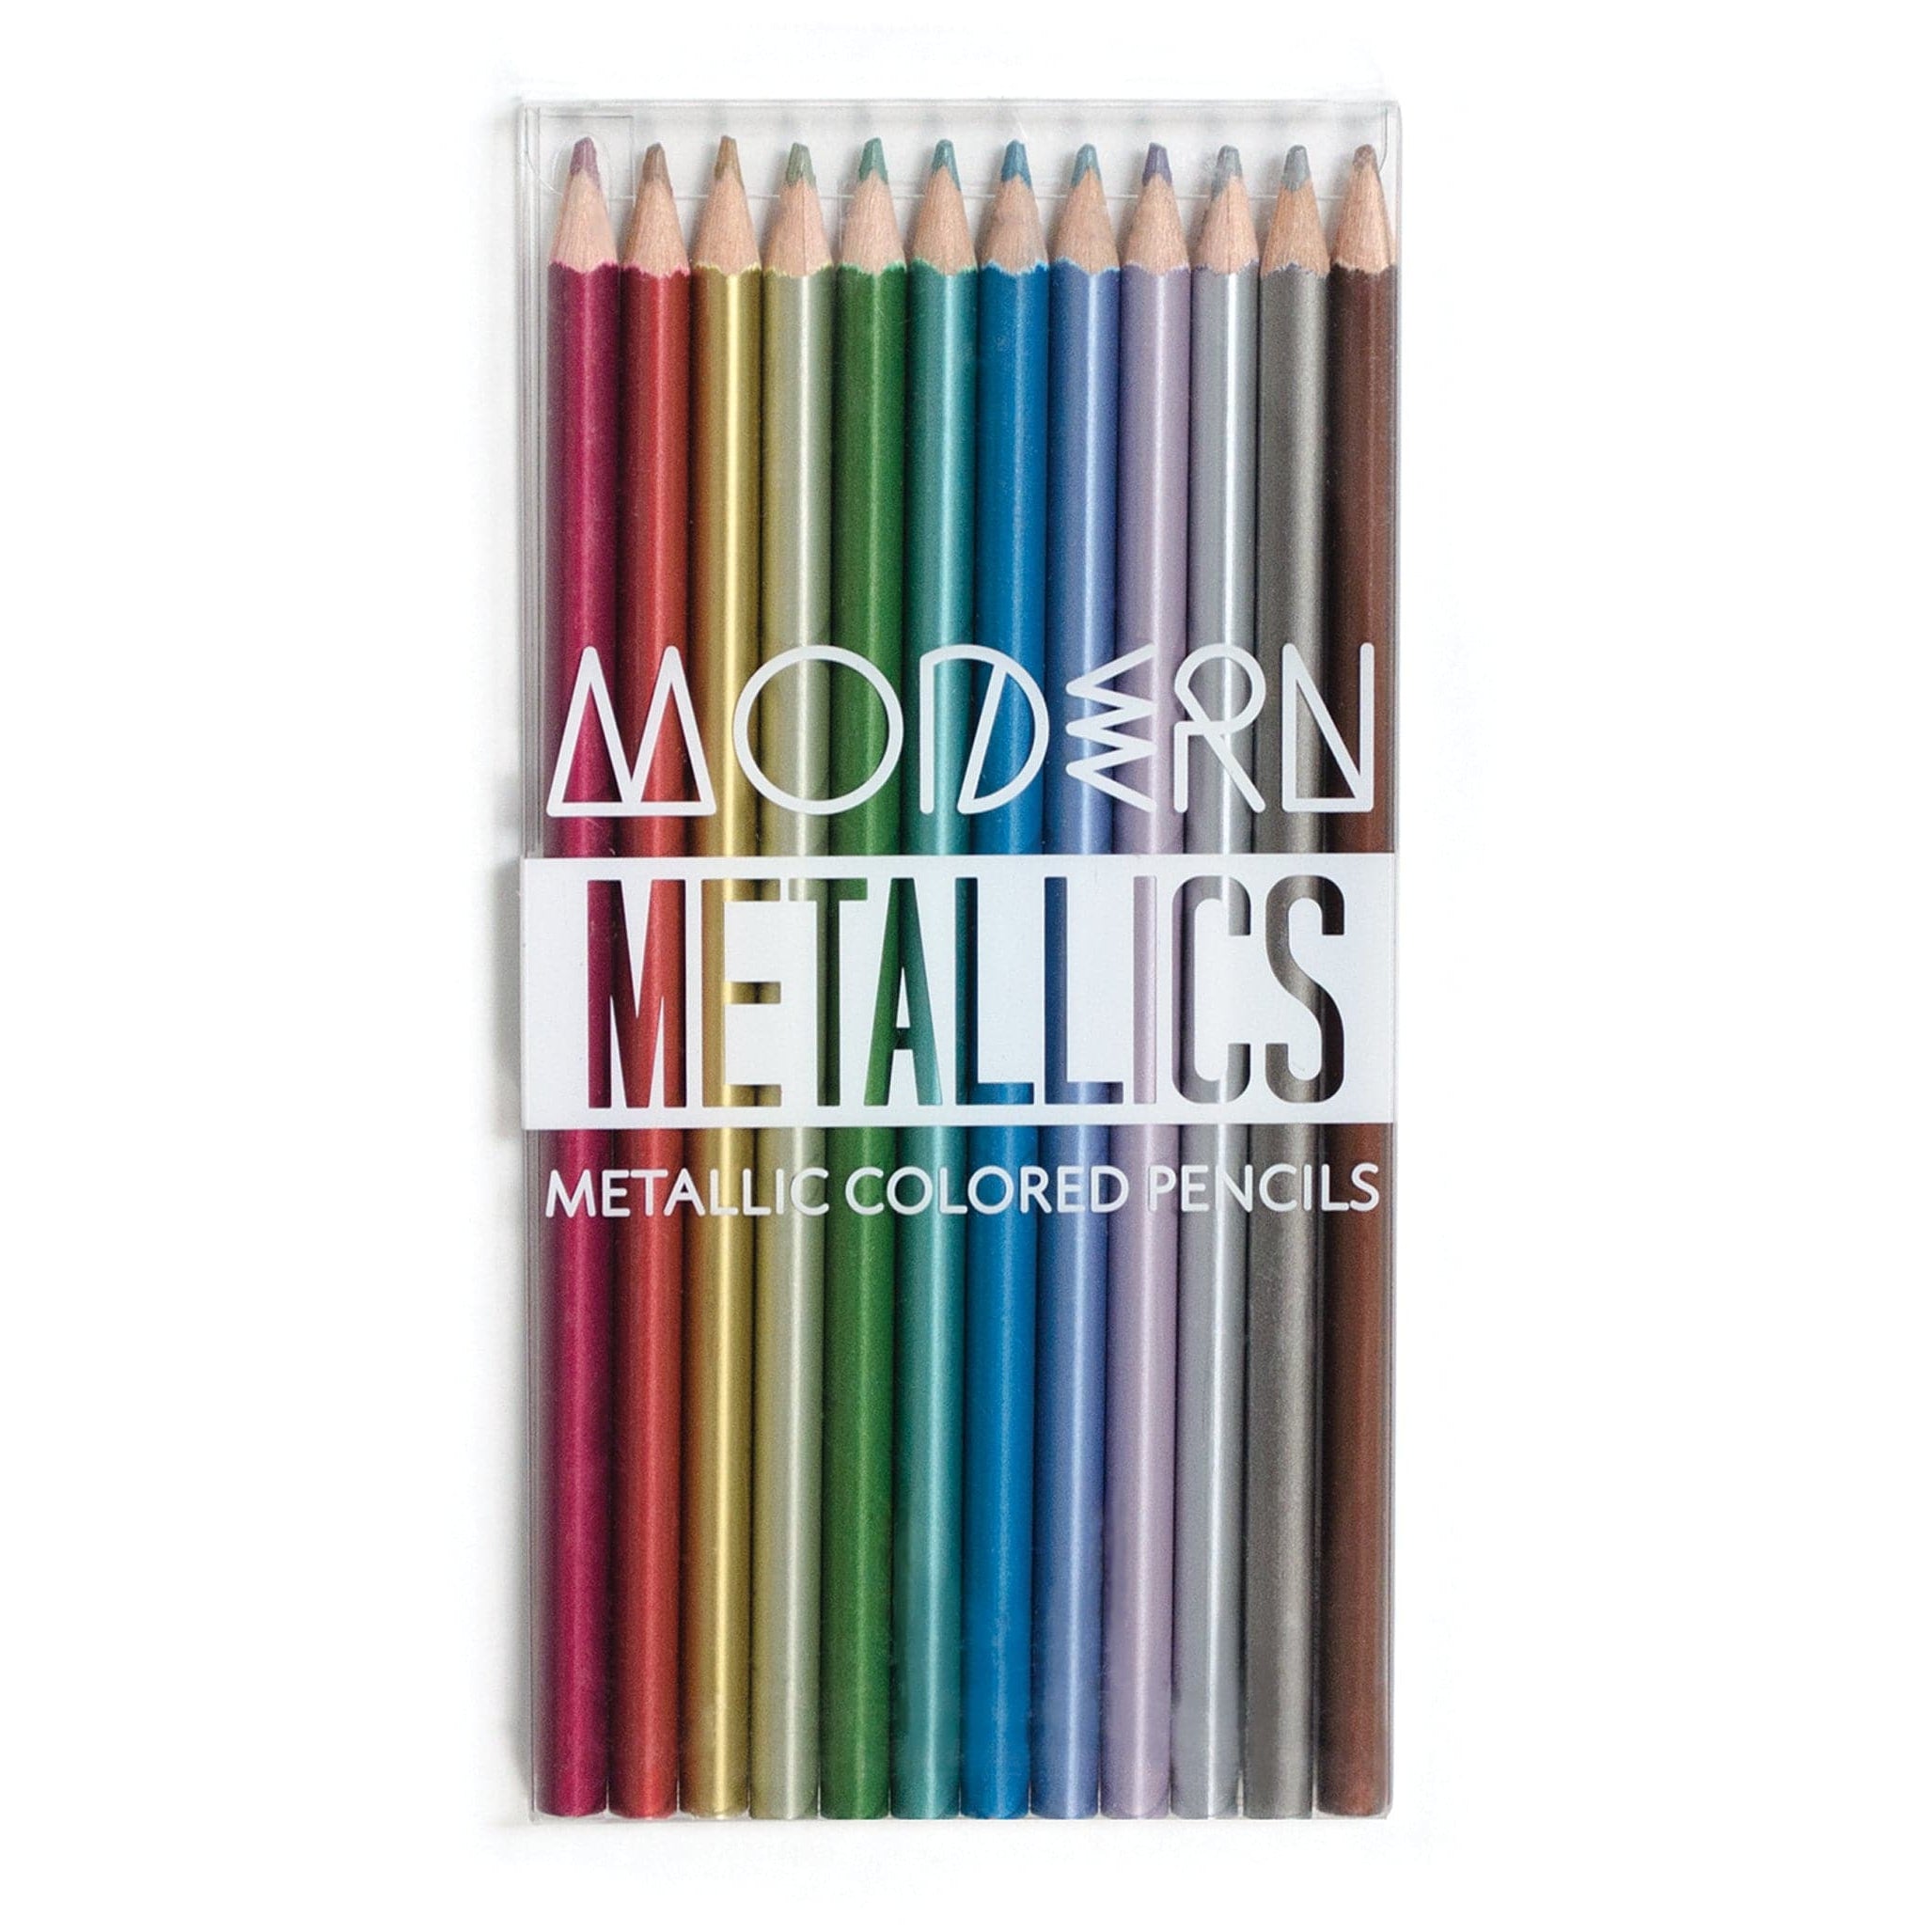 Ooly-Modern Metallics Colored Pencils-128-111-Legacy Toys